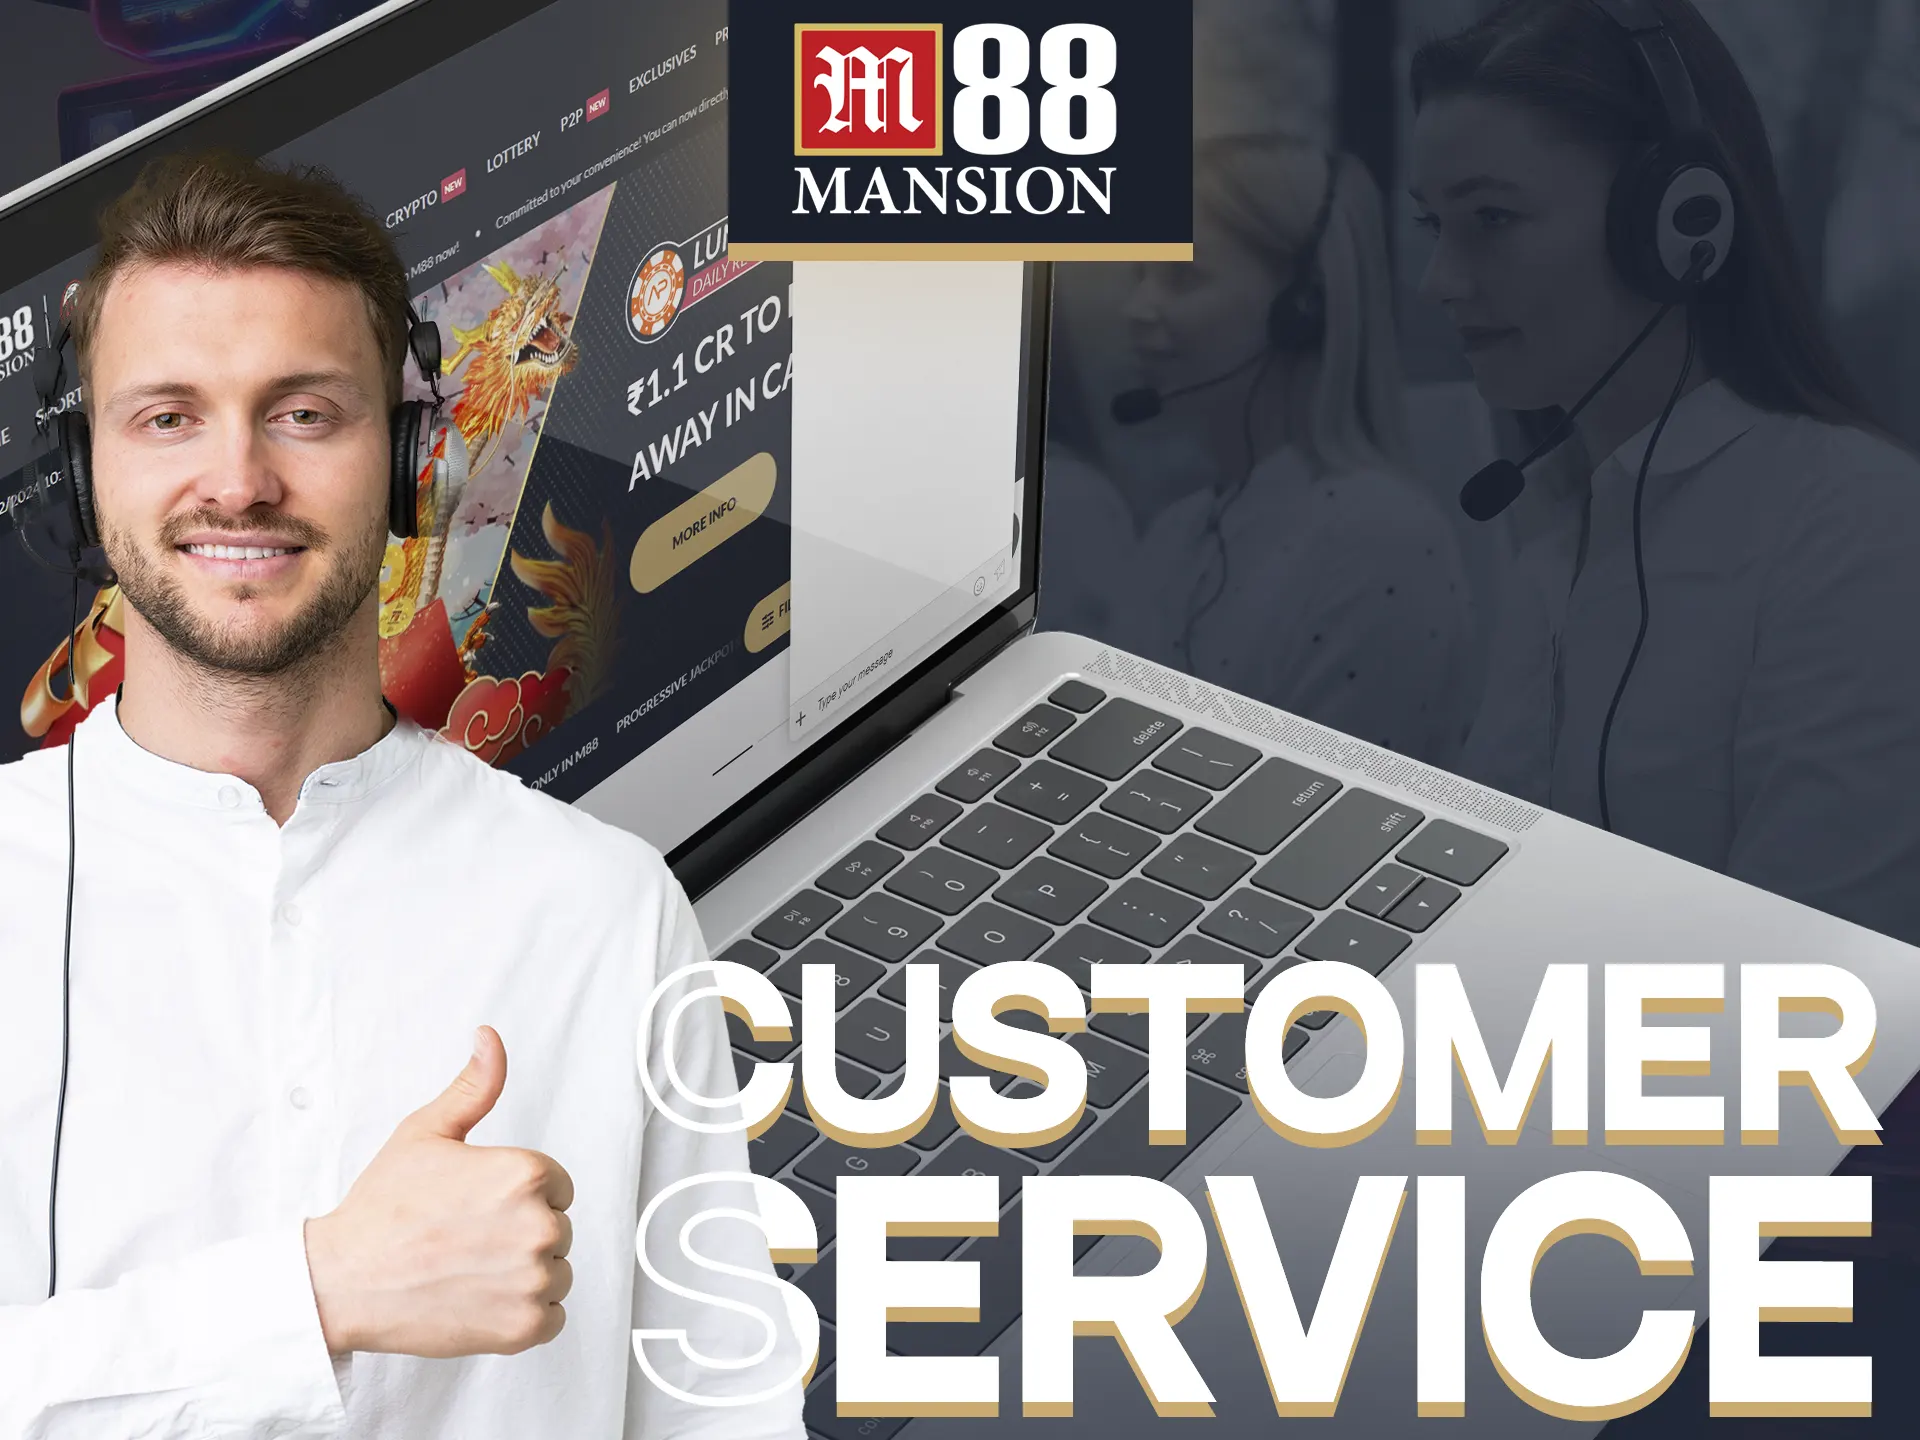 M88's customer service helps anytime, anywhere.